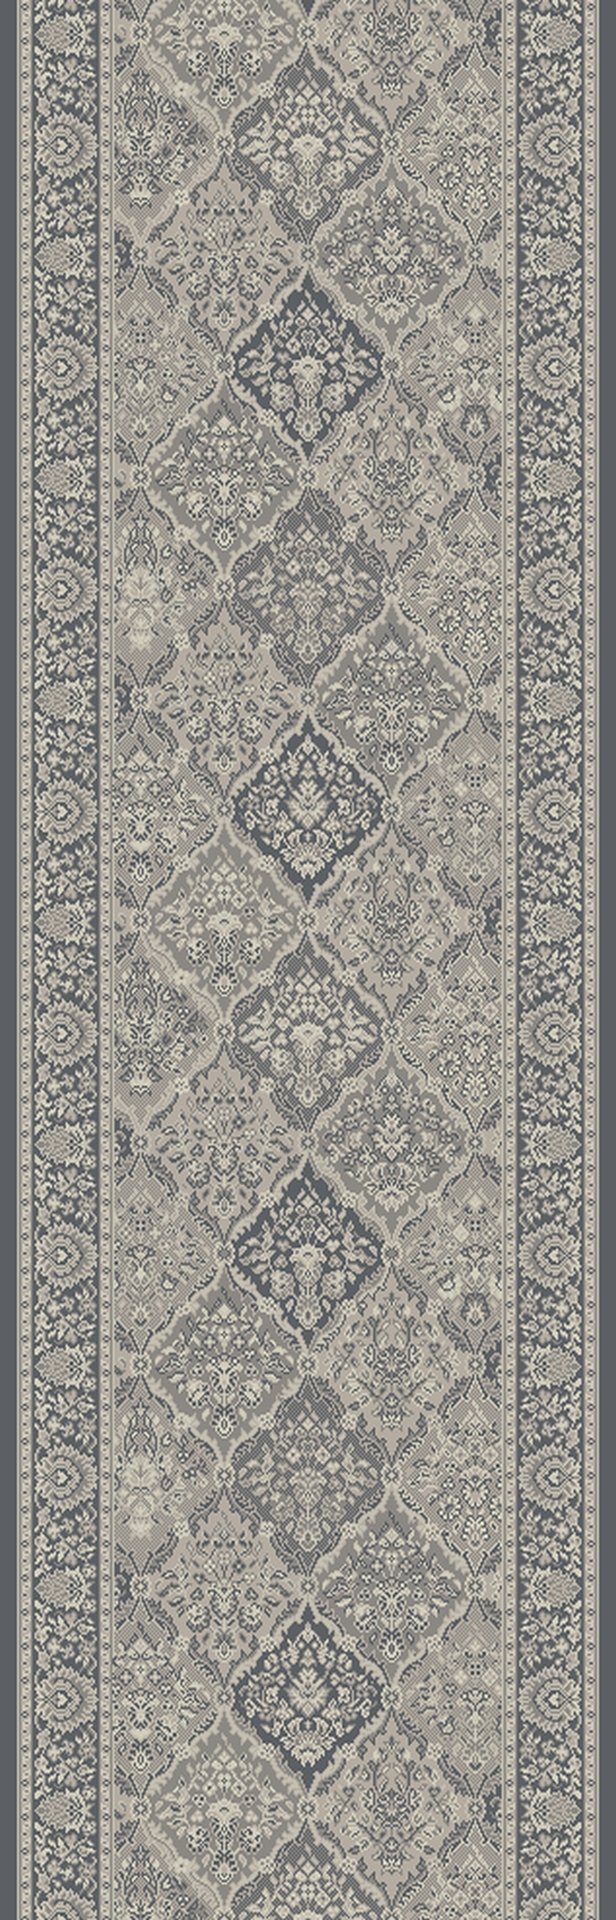 Provinicia Panel Grey Stair Runners 2786 By Rug Depot 8 Sizes Nashua